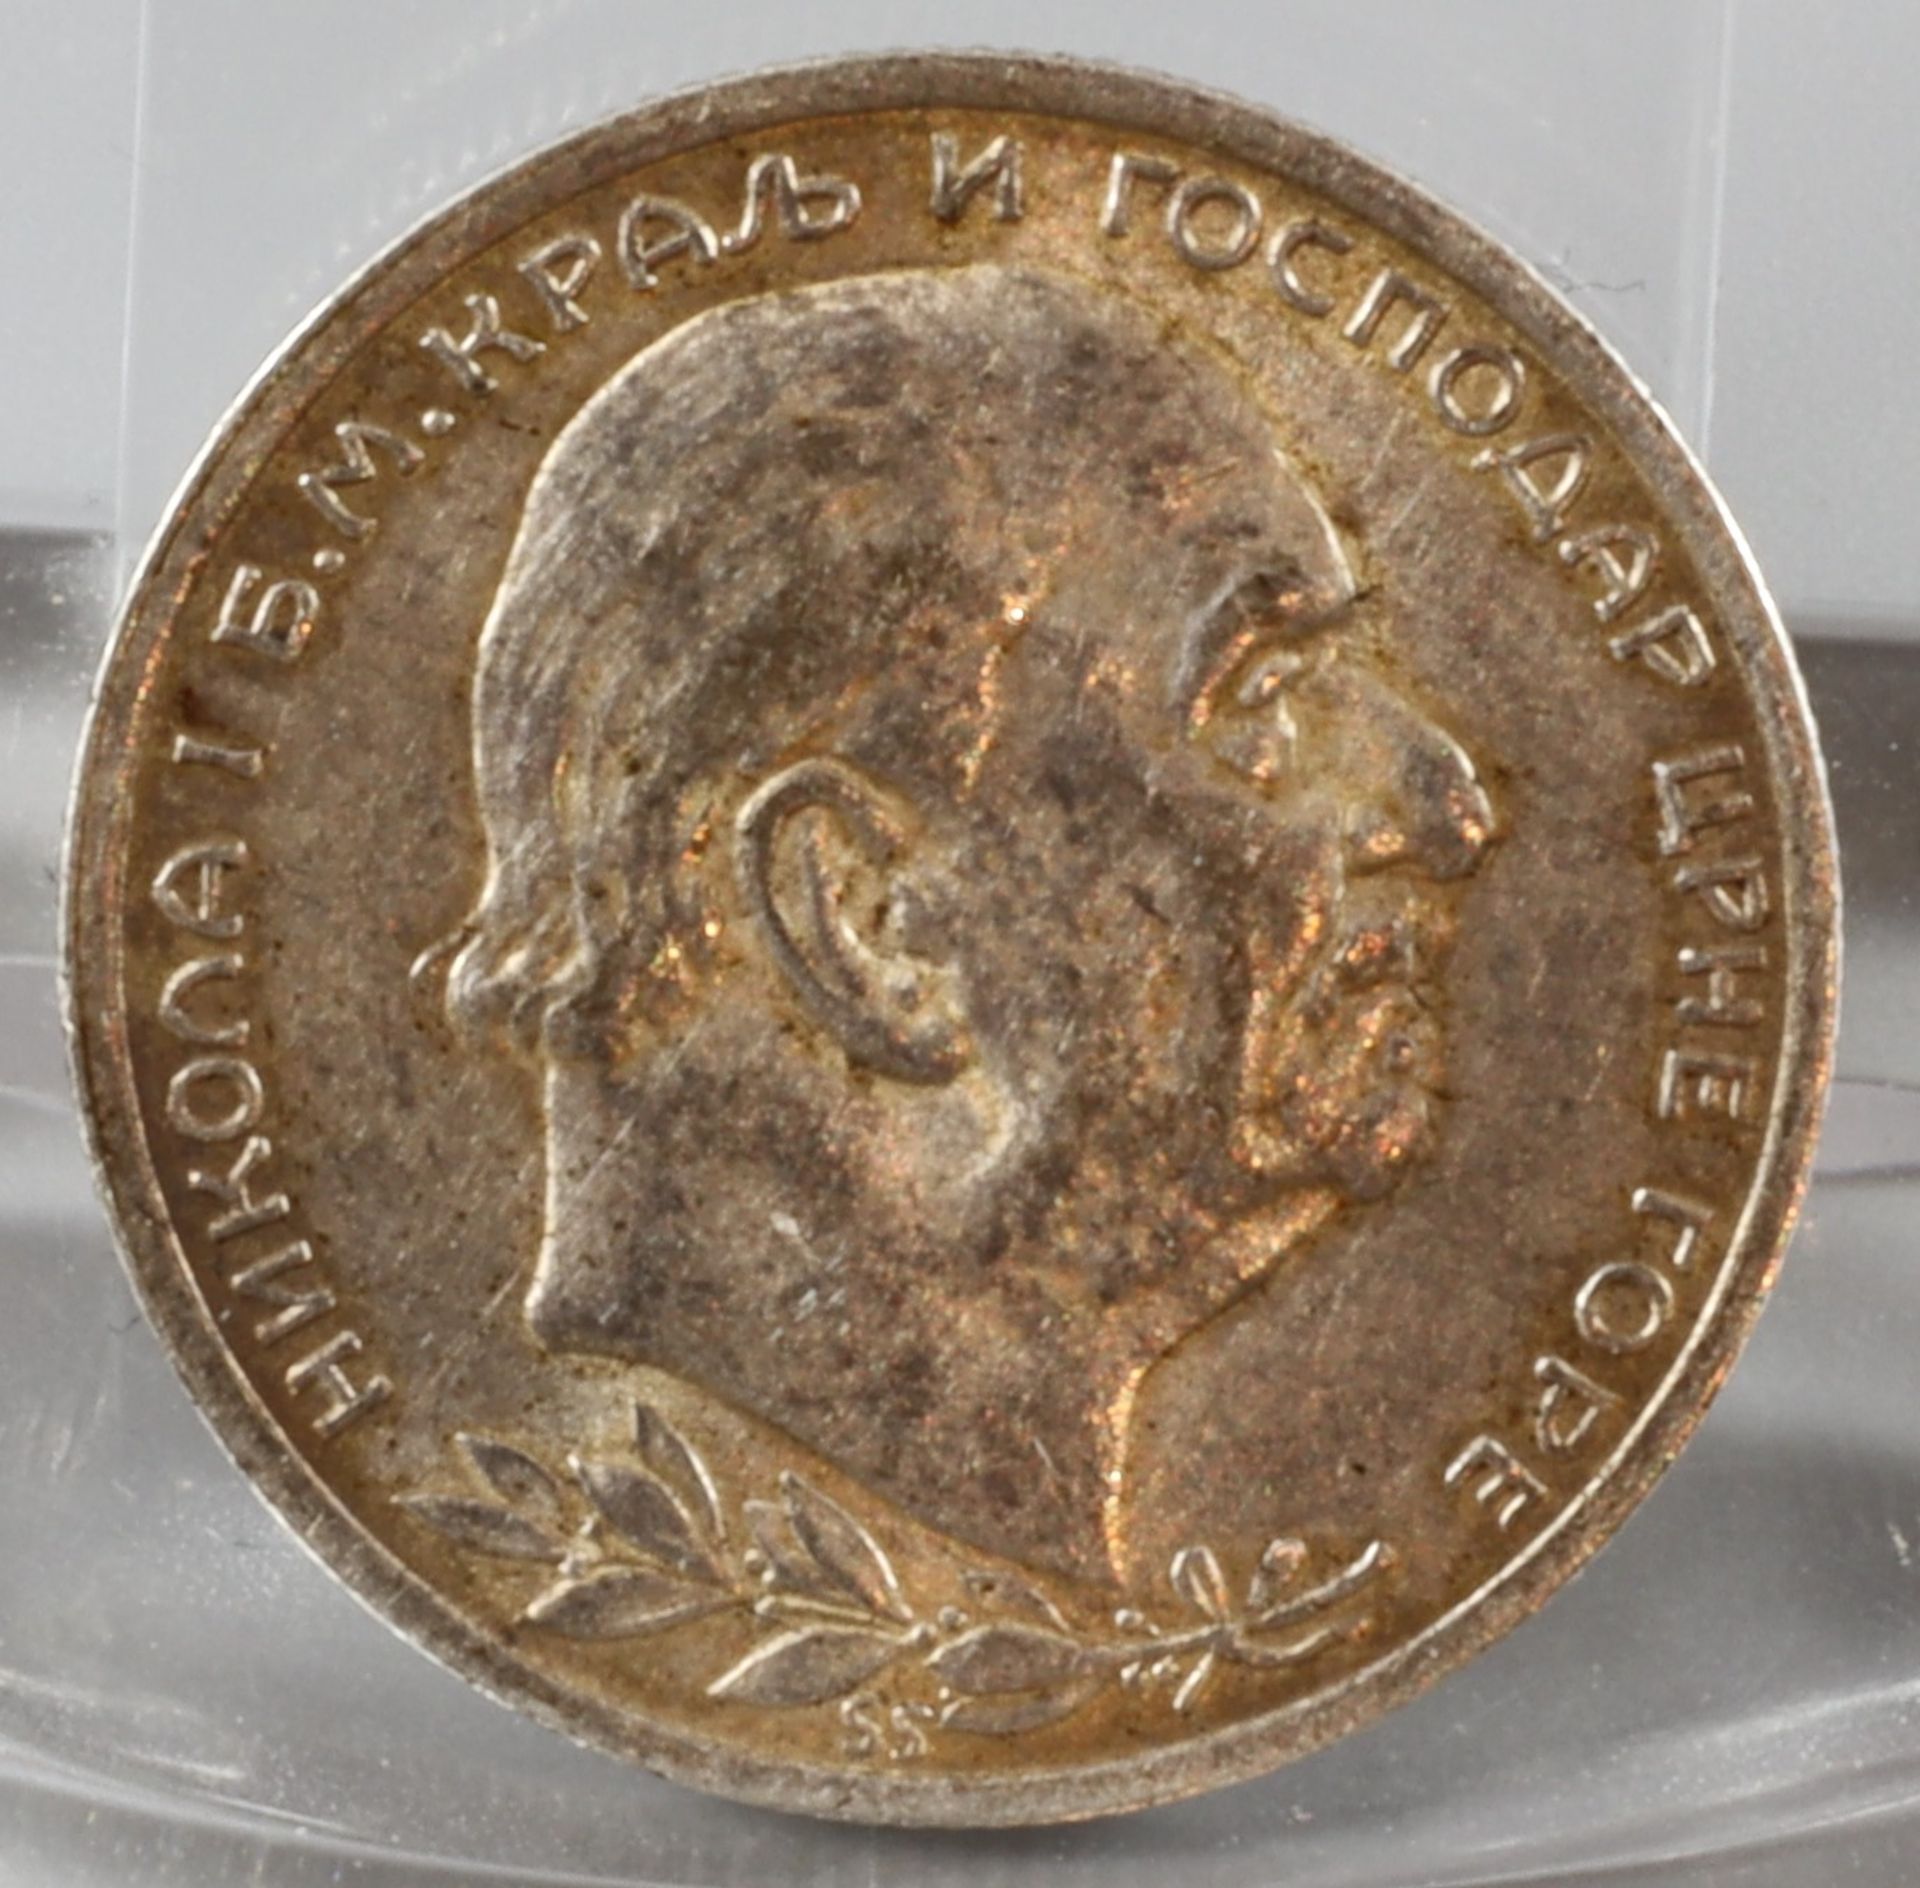 Silver coin one Perper - Montenegro 1914 - Image 2 of 2